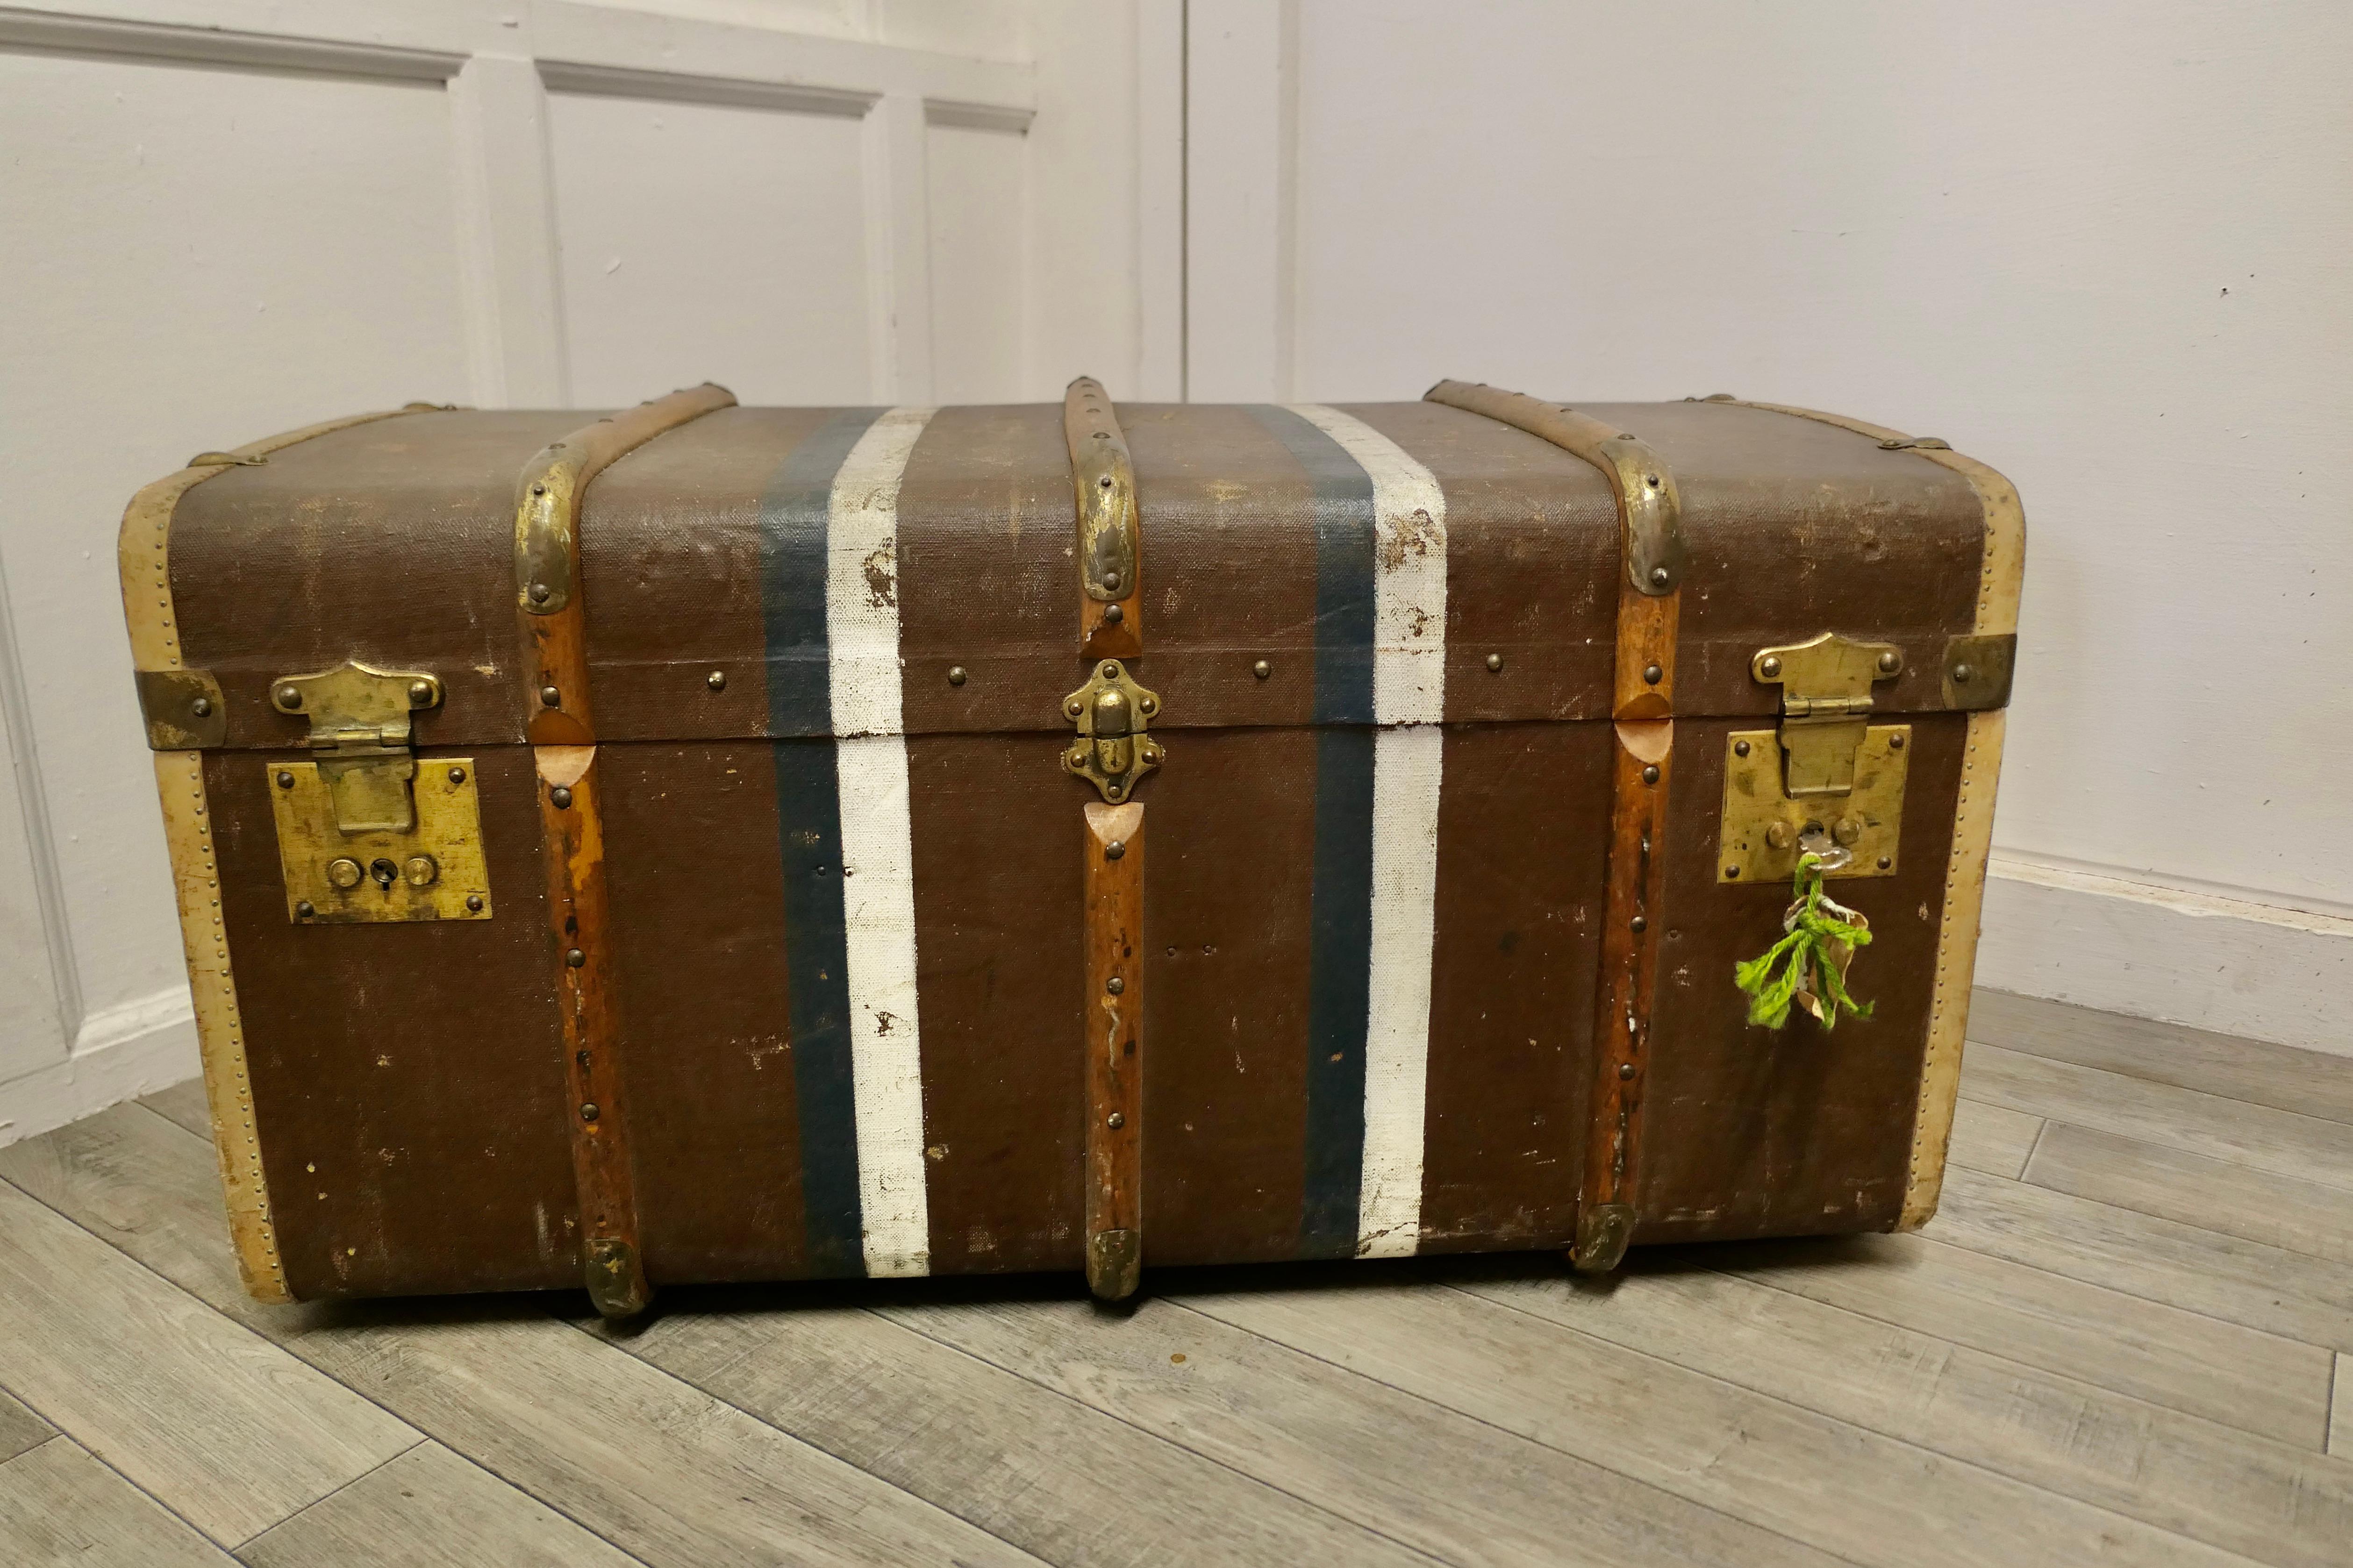 Large Canadian canvas, wood and brass bound steamer trunk.

This is a very top quality 19th century travel trunk, it is covered in canvas, it has wooden and brass banding, on the sides there are leather carrying handles and on the front 3 brass